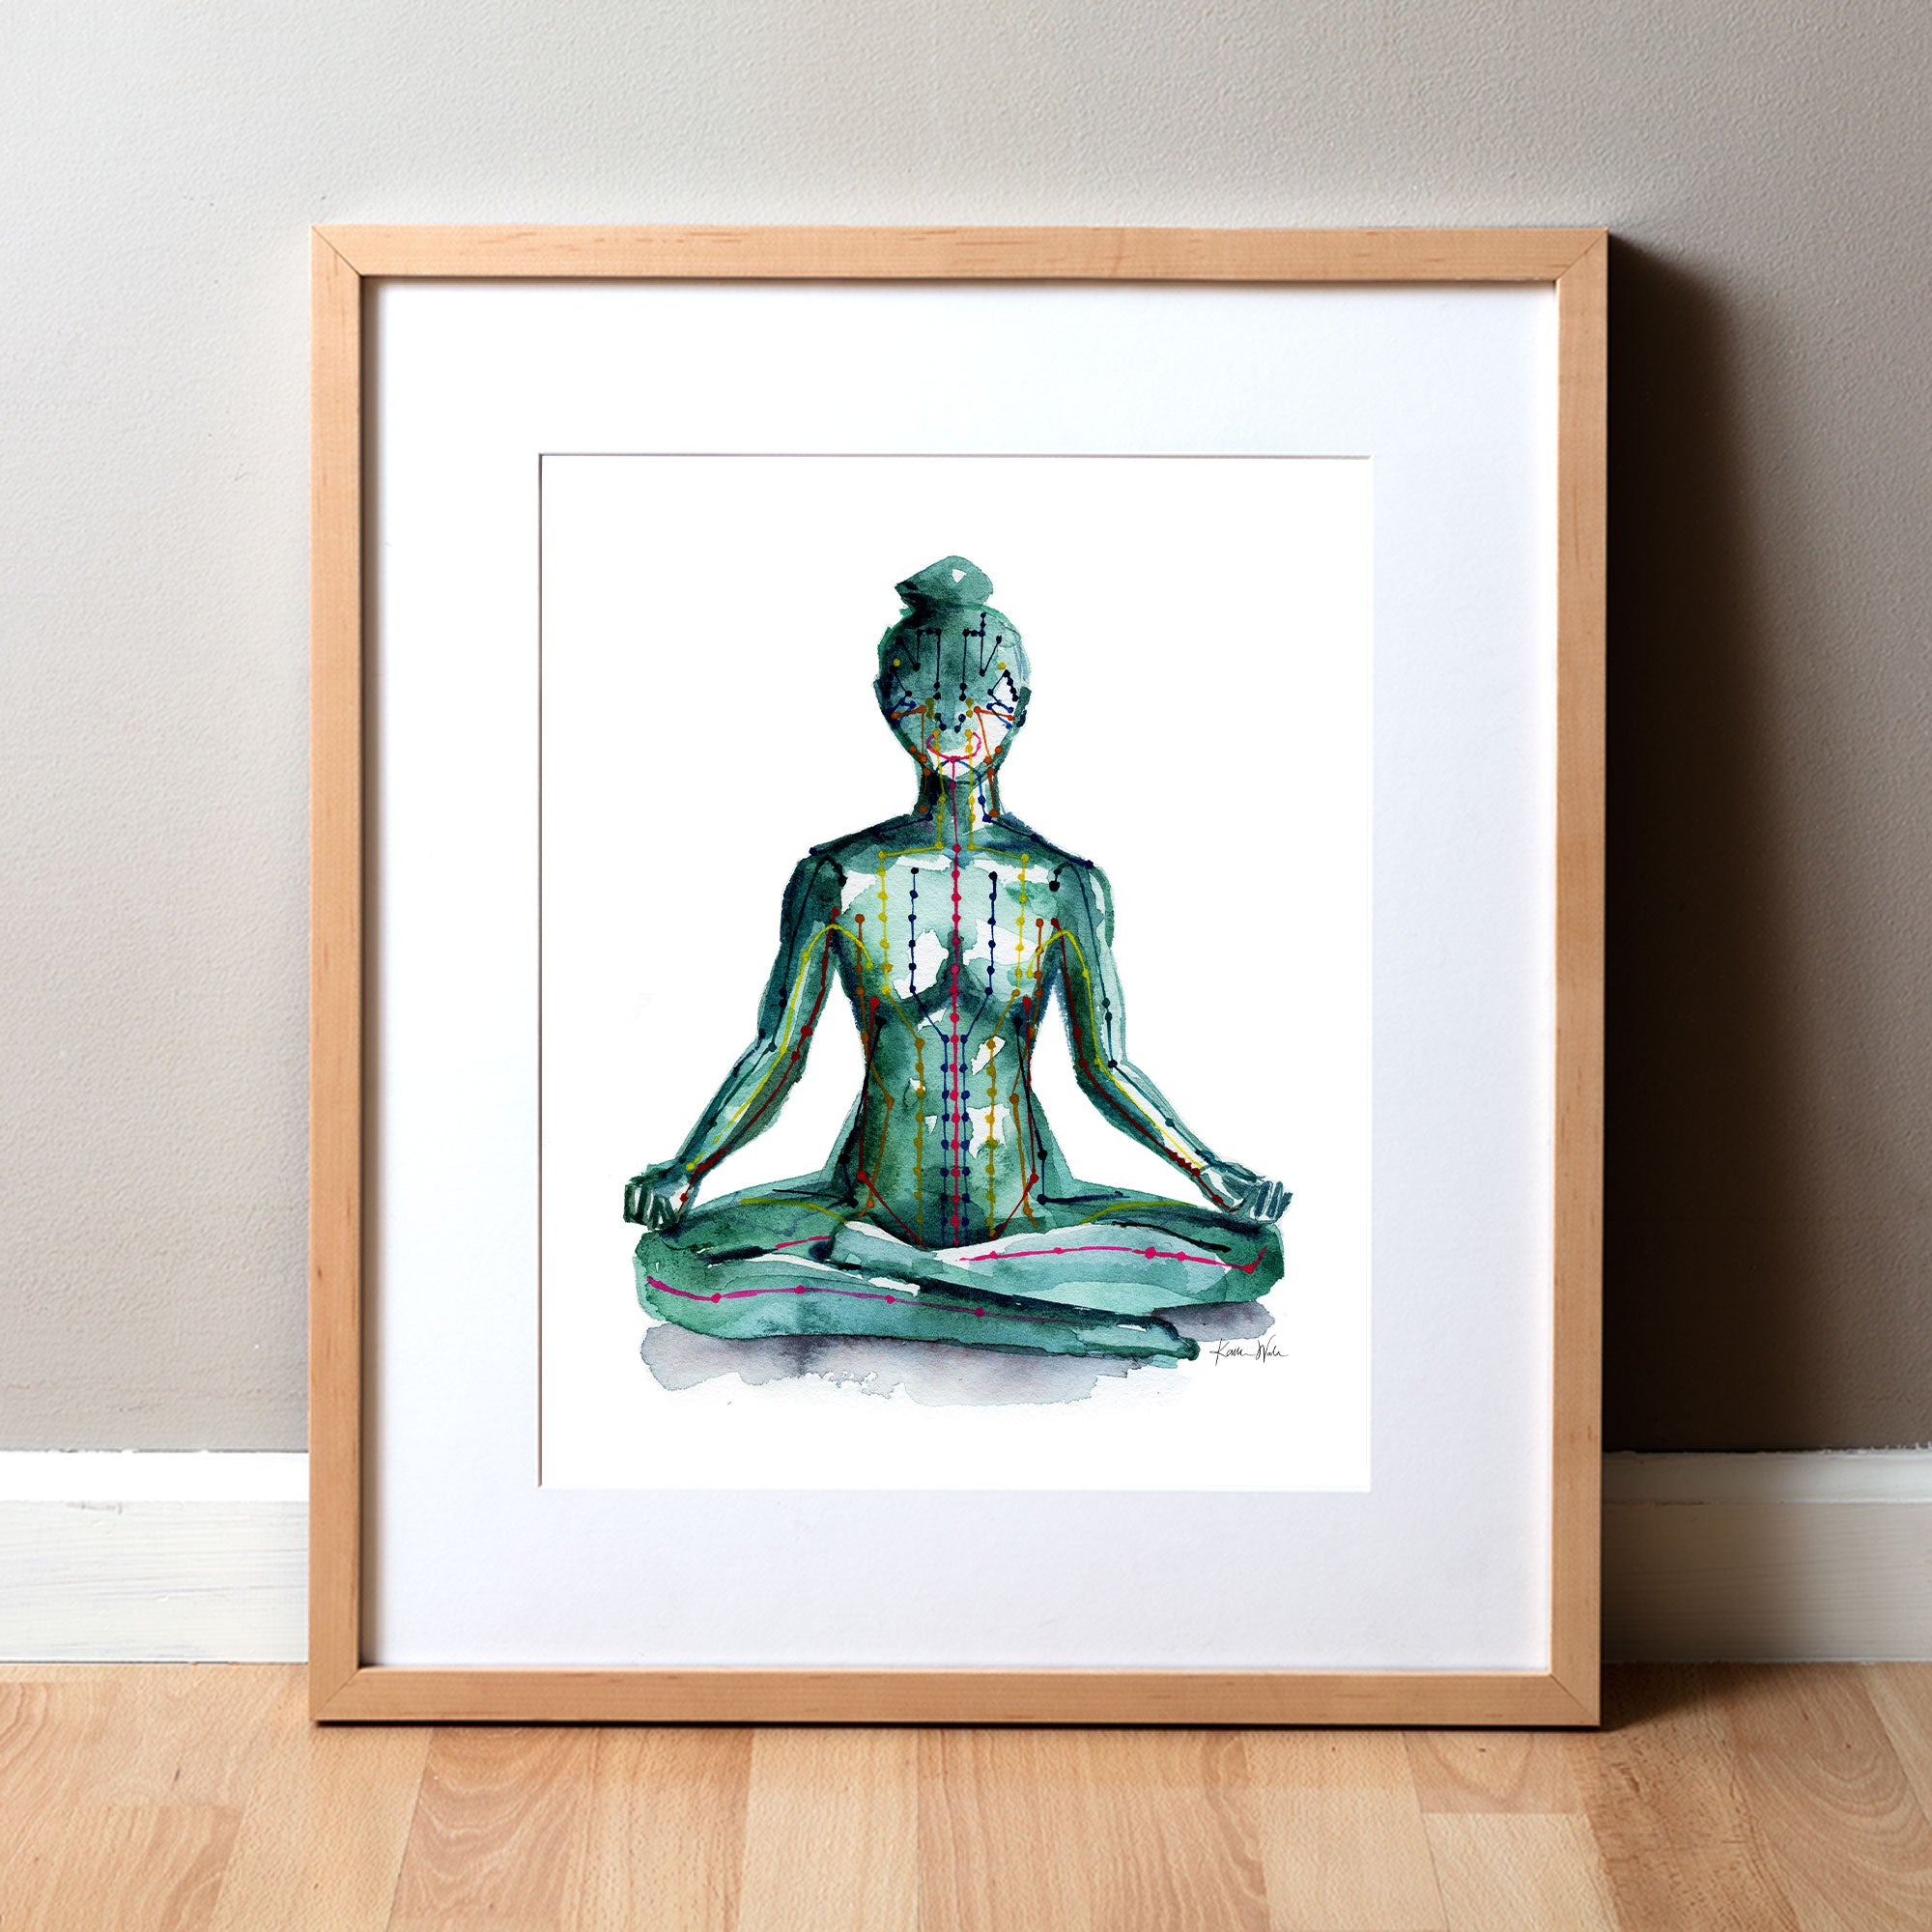 Framed watercolor painting of a person sitting in a meditative pose with meridian paths showing.